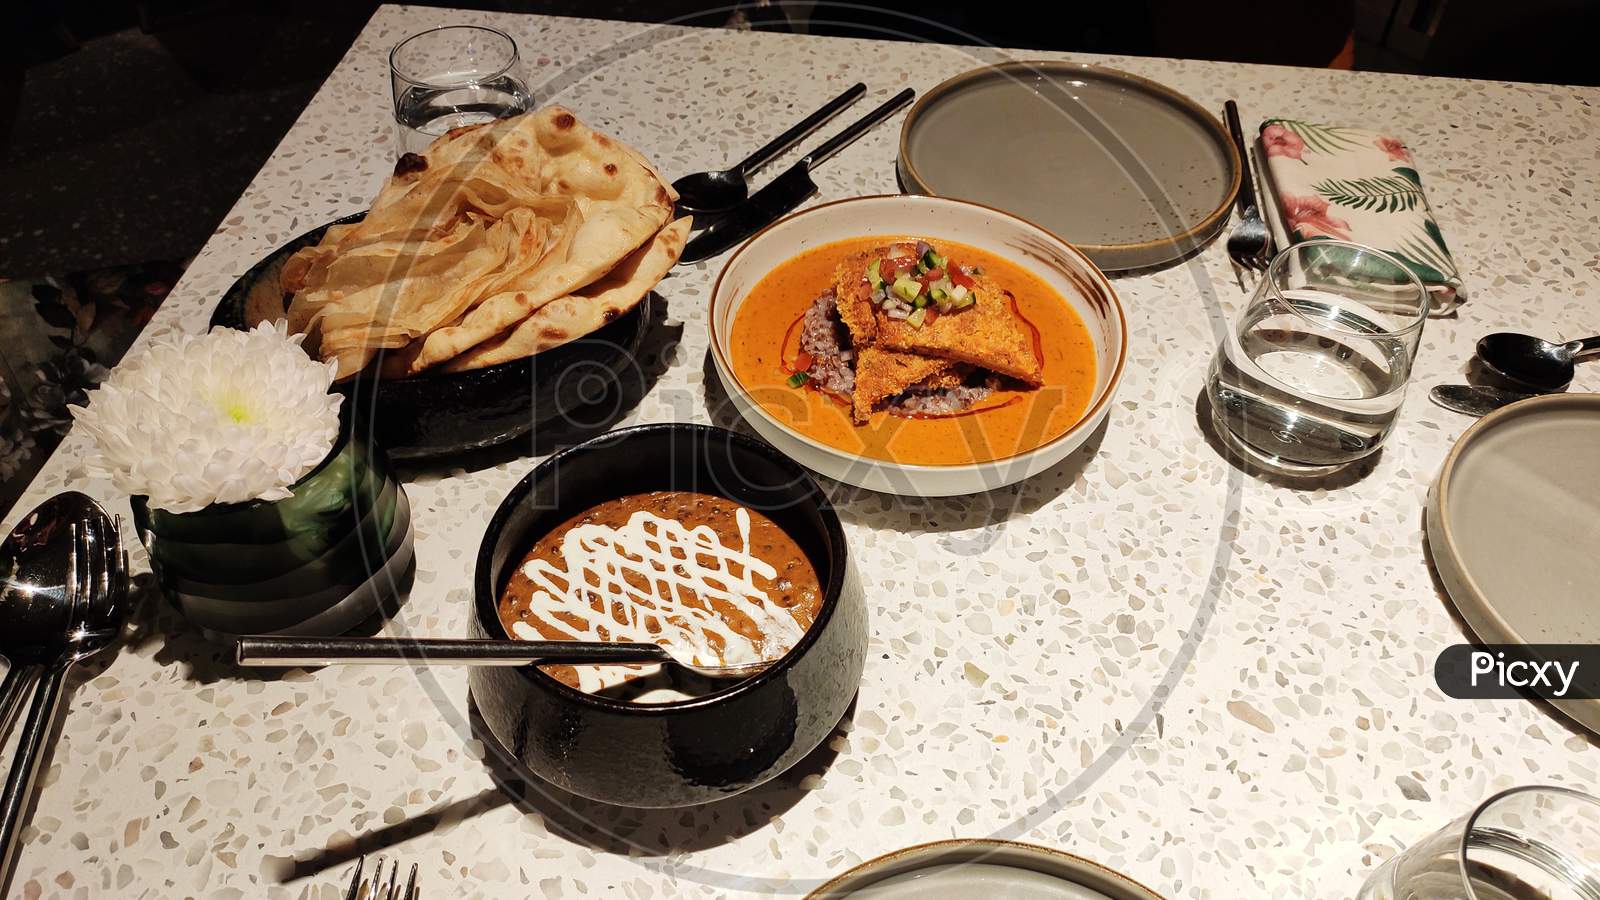 Dal Makhni and Shahi Panner served with naan.